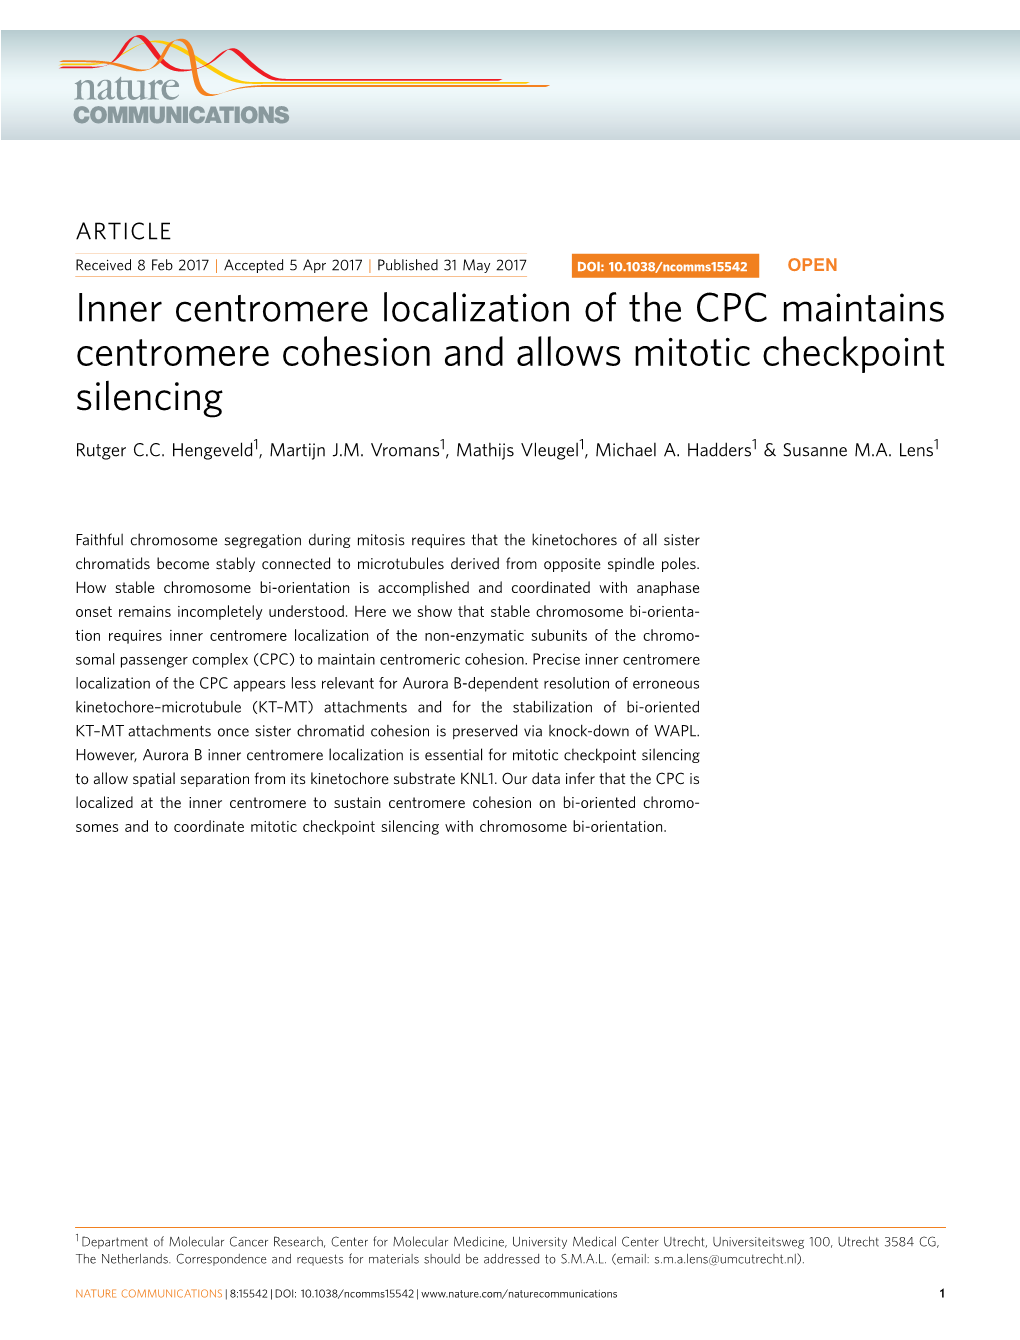 Inner Centromere Localization of the CPC Maintains Centromere Cohesion and Allows Mitotic Checkpoint Silencing